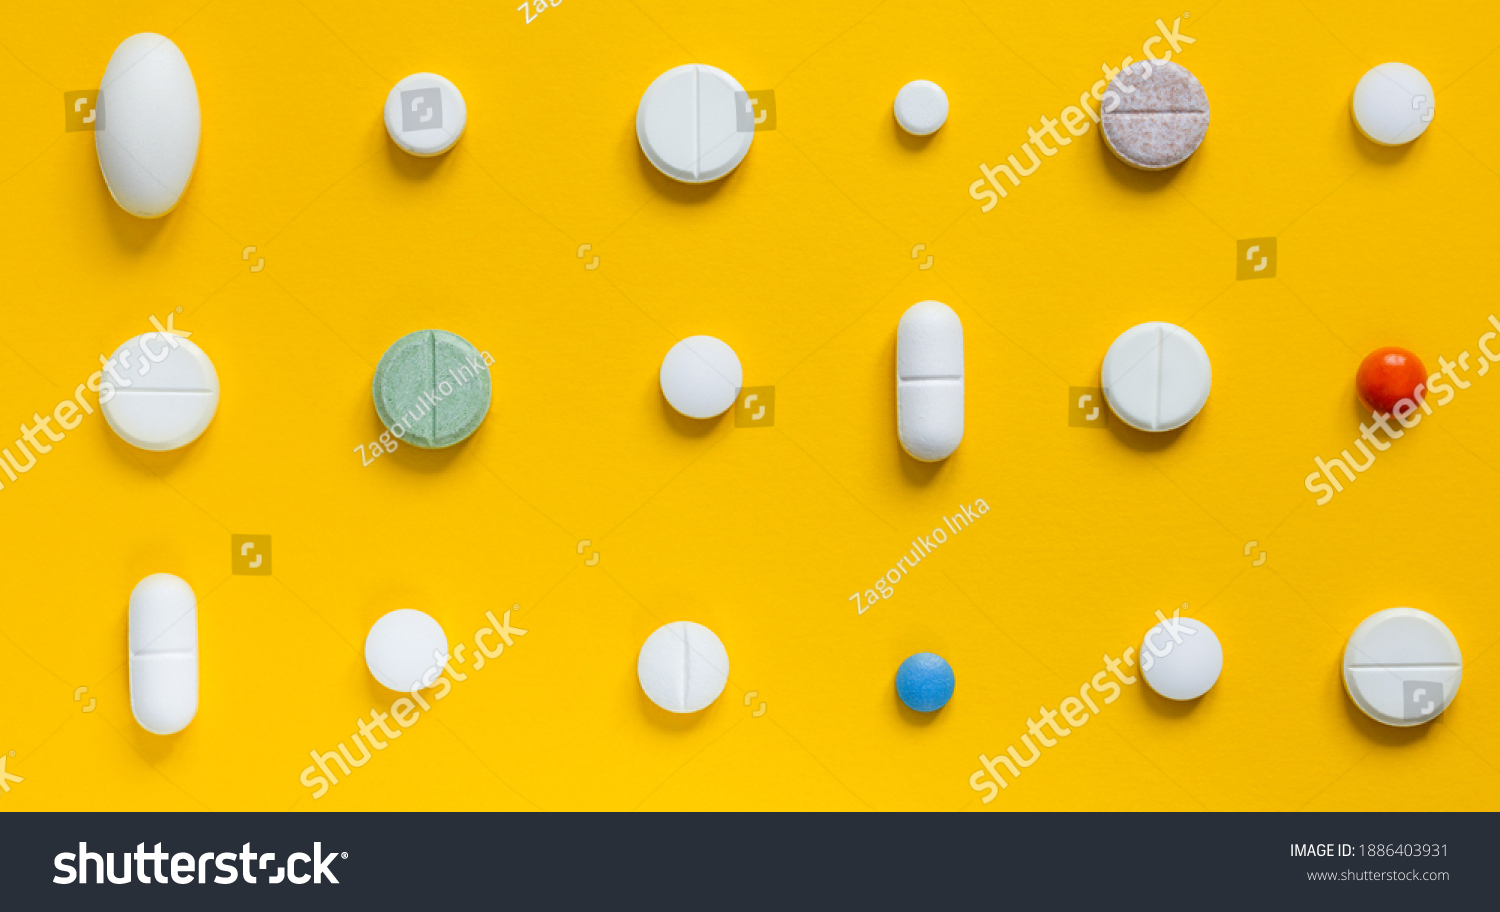 Medical white pills on a yellow background. Pharmaceutical concept #1886403931